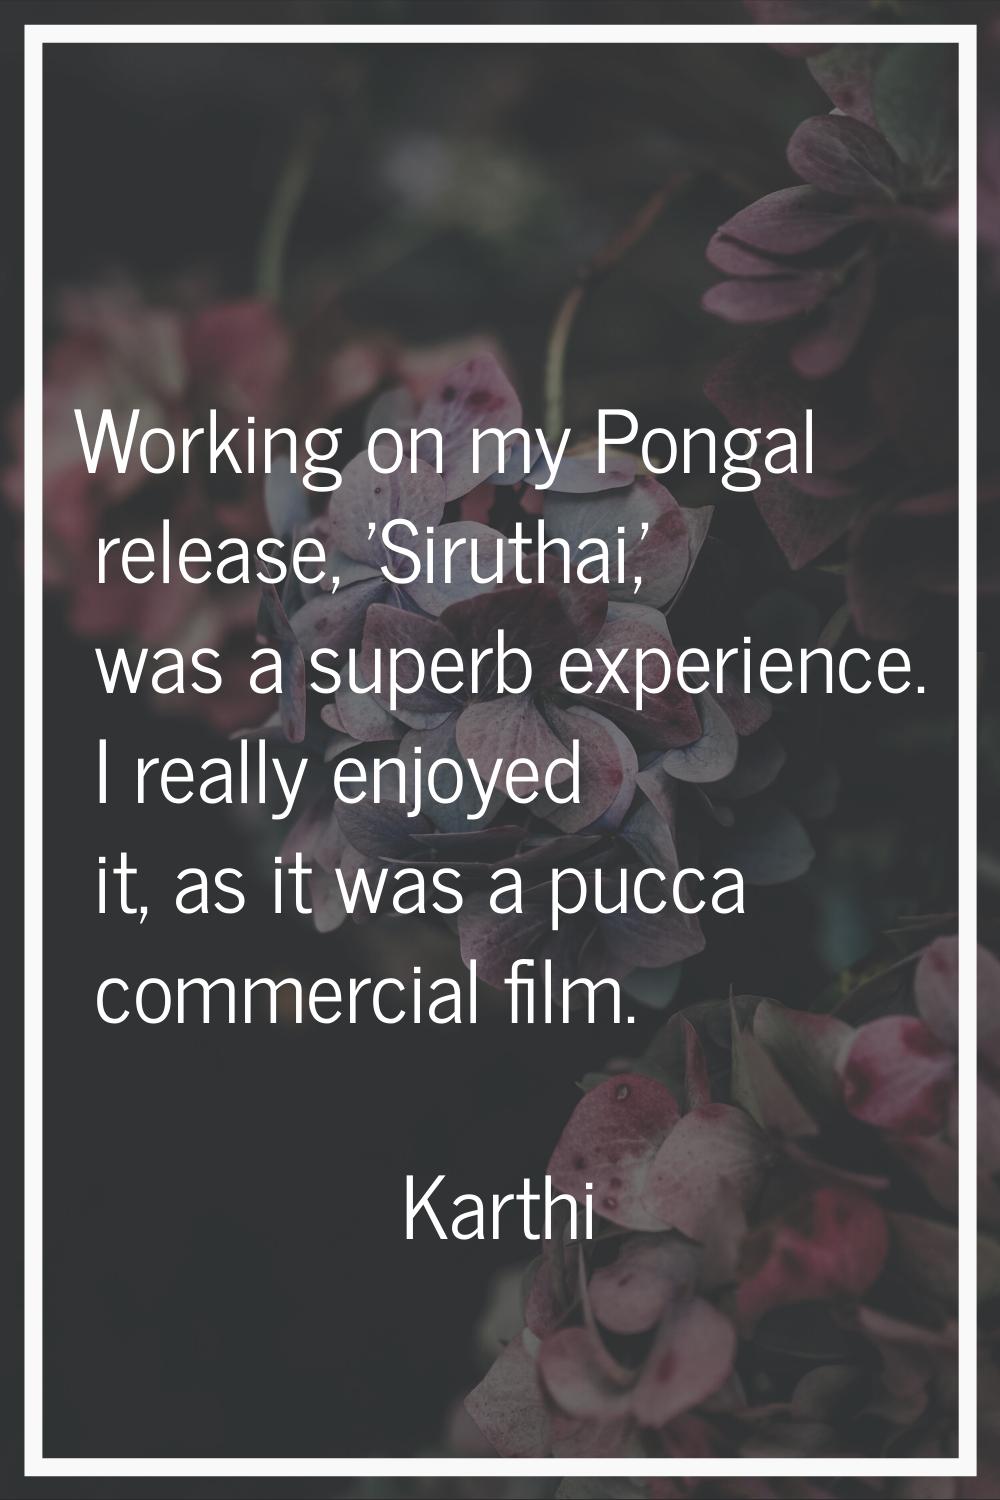 Working on my Pongal release, 'Siruthai,' was a superb experience. I really enjoyed it, as it was a